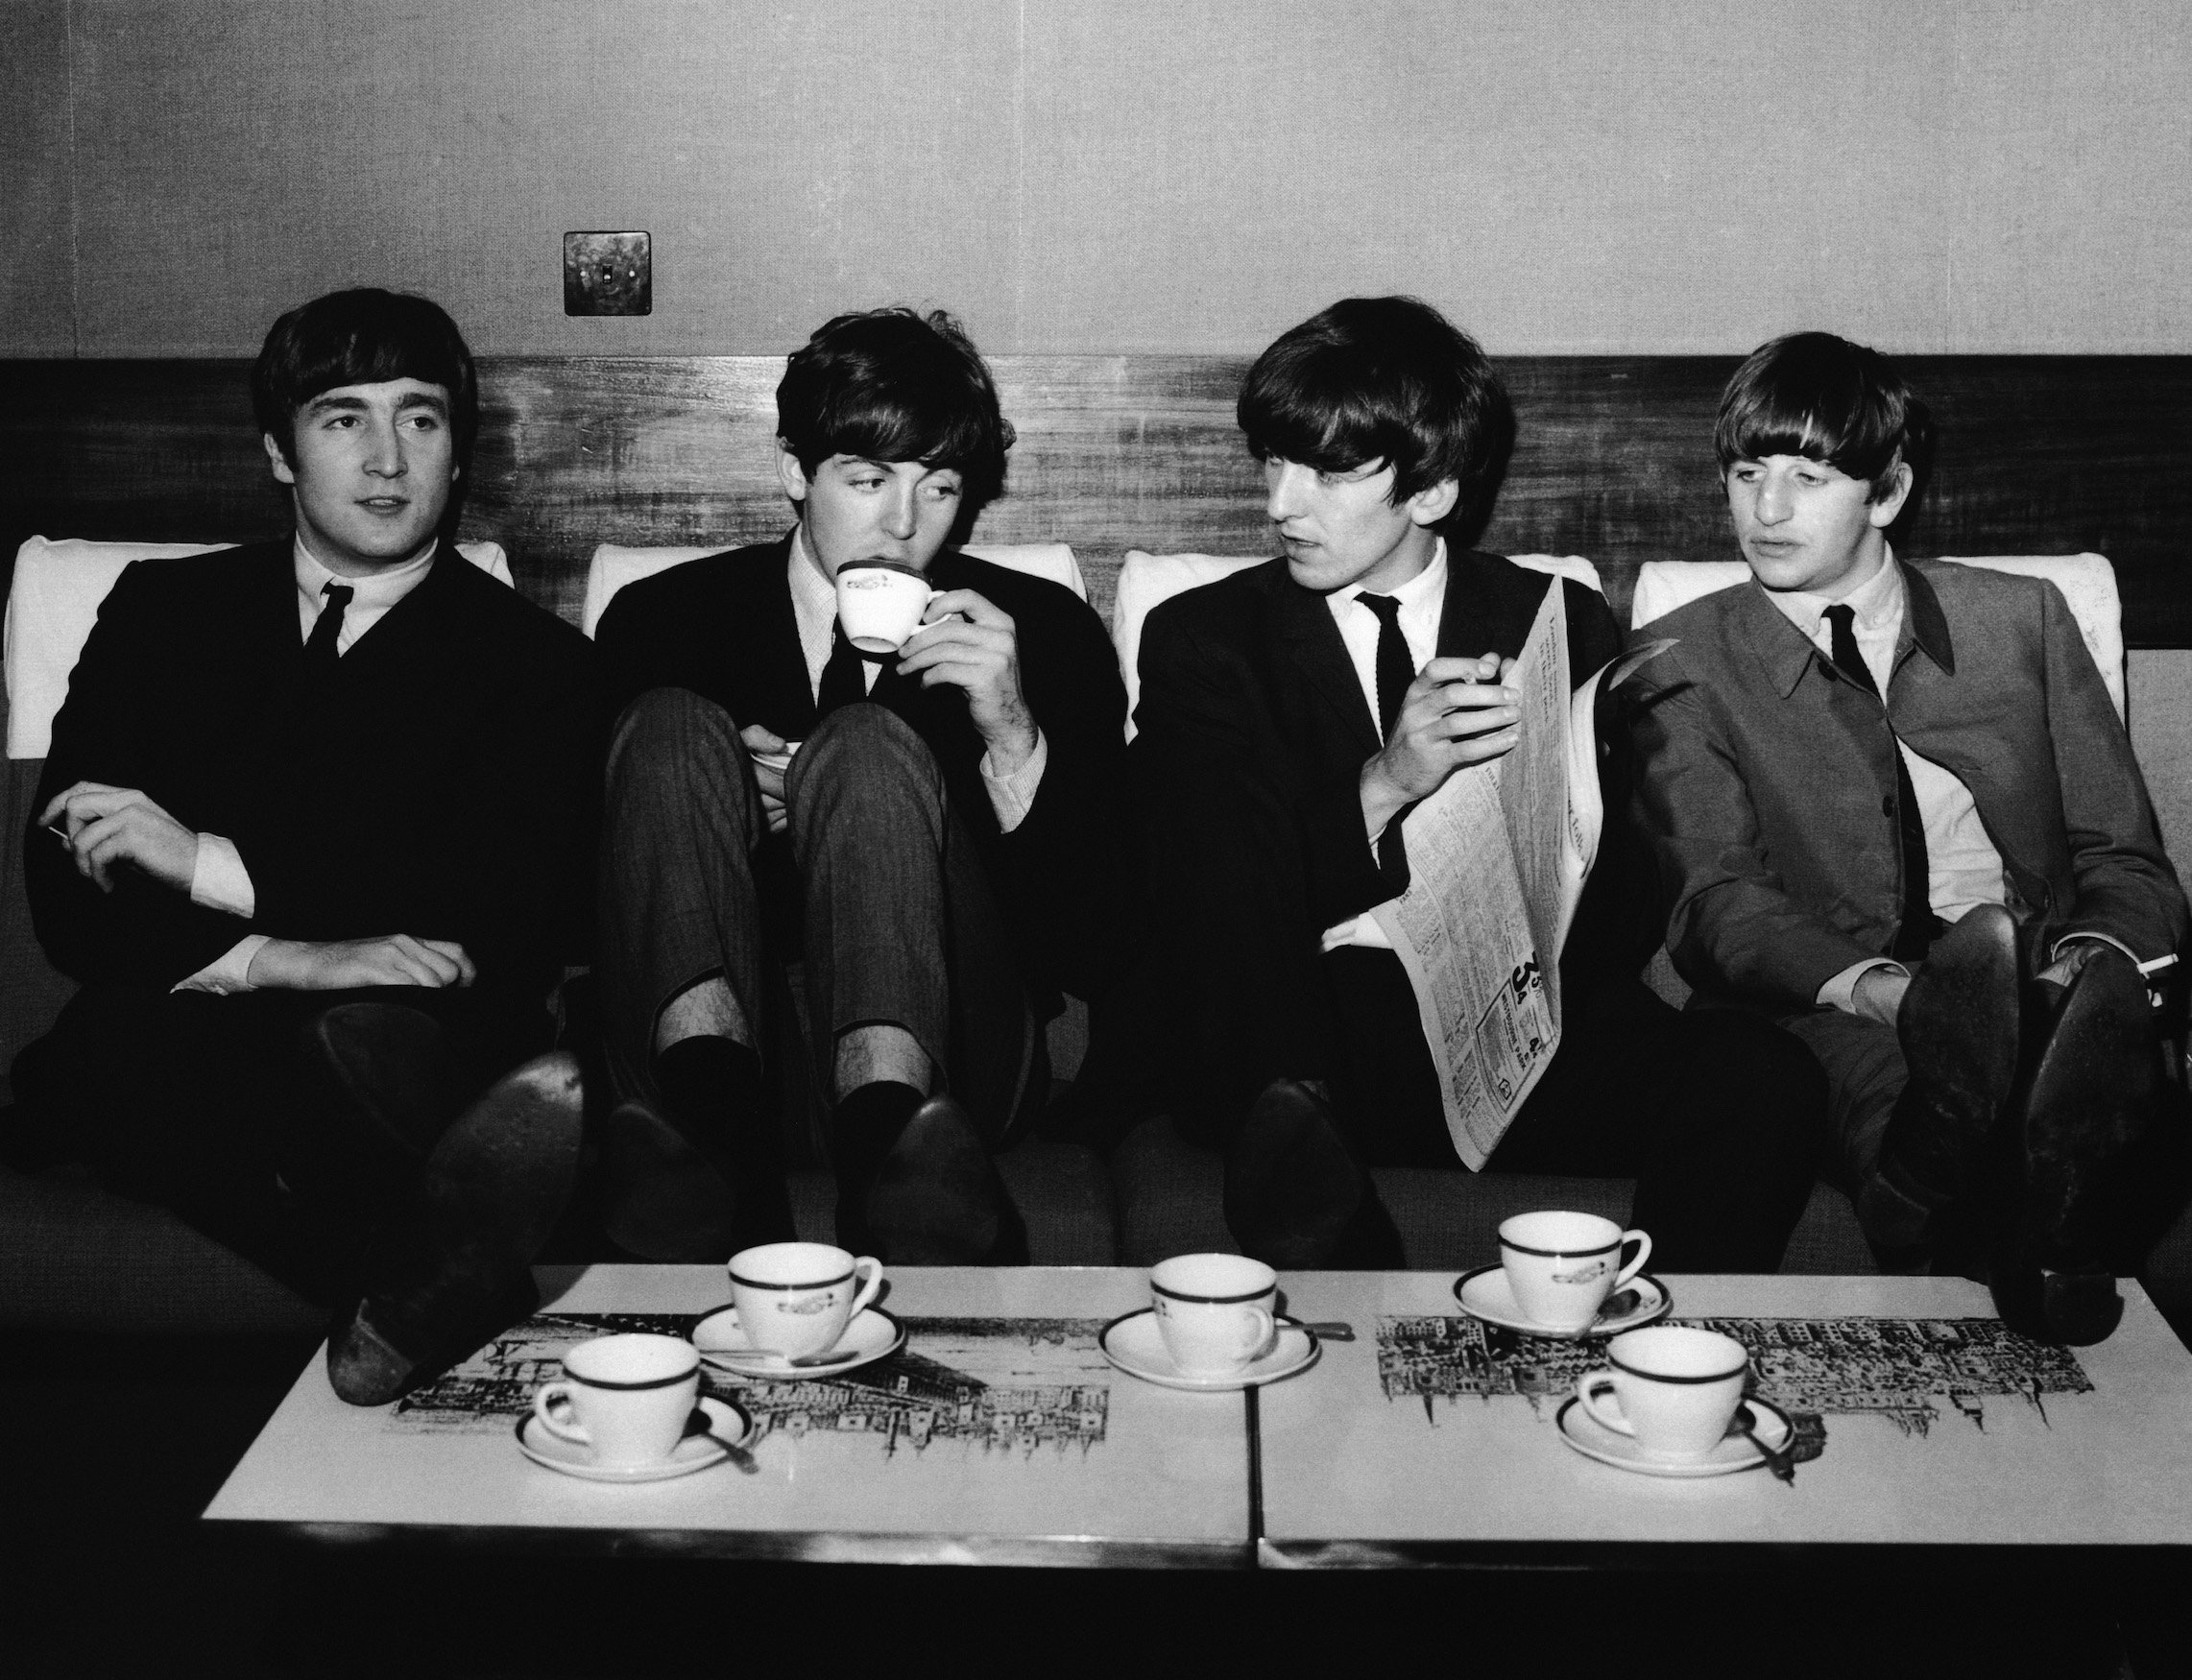 The Beatles take a break during rehearsals for the Royal Variety Performance at the Prince of Wales Theatre in London, England